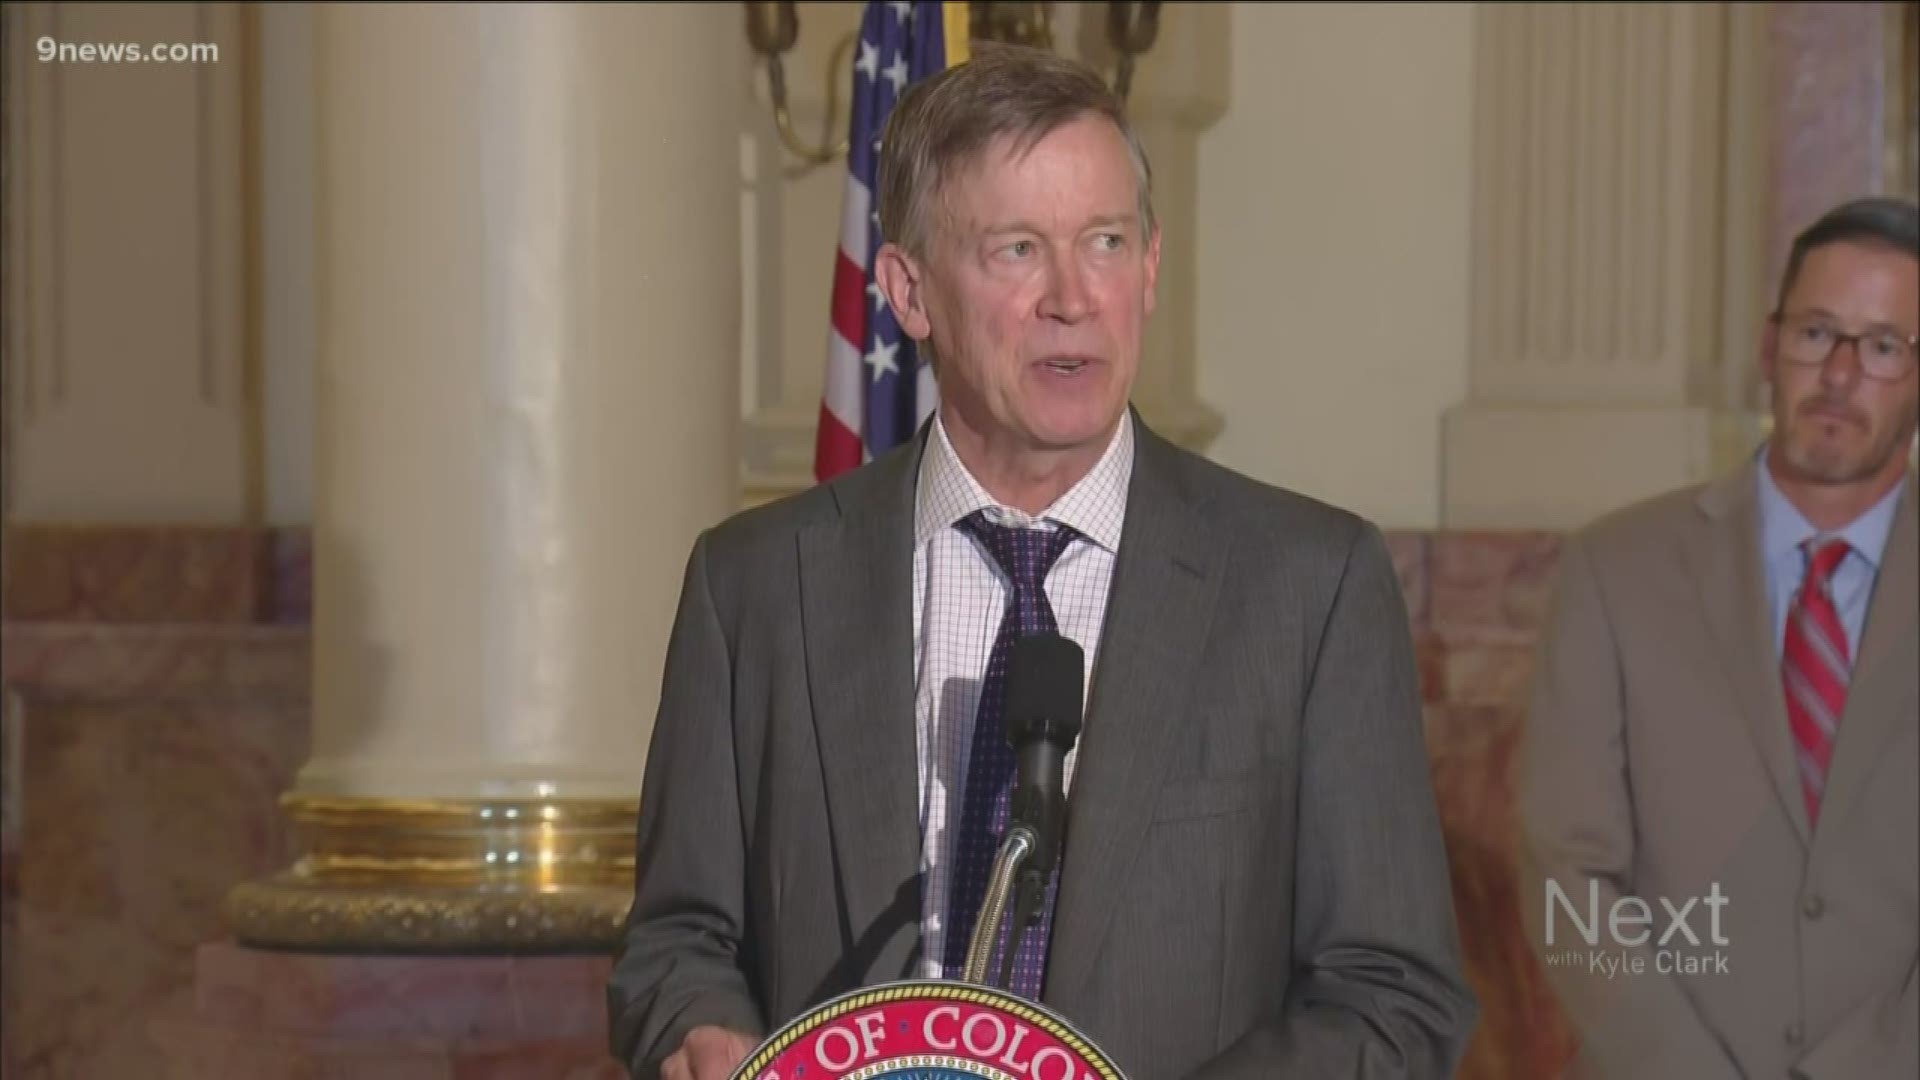 The report doesn't take a position on whether Hickenlooper did anything wrong - that comes later.